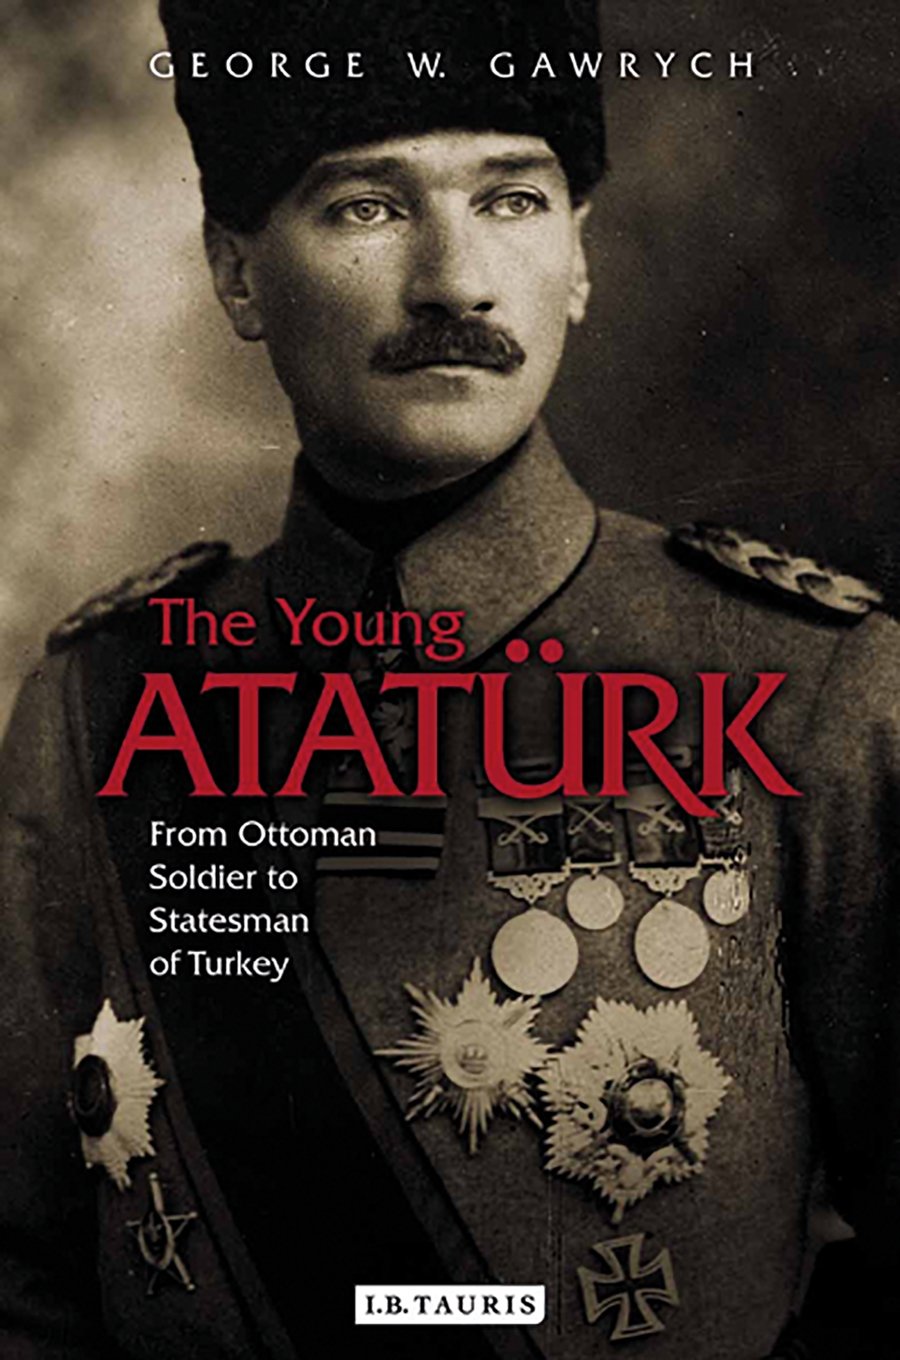 The Young Atatürk From Ottoman Soldier to Statesman of Turkey